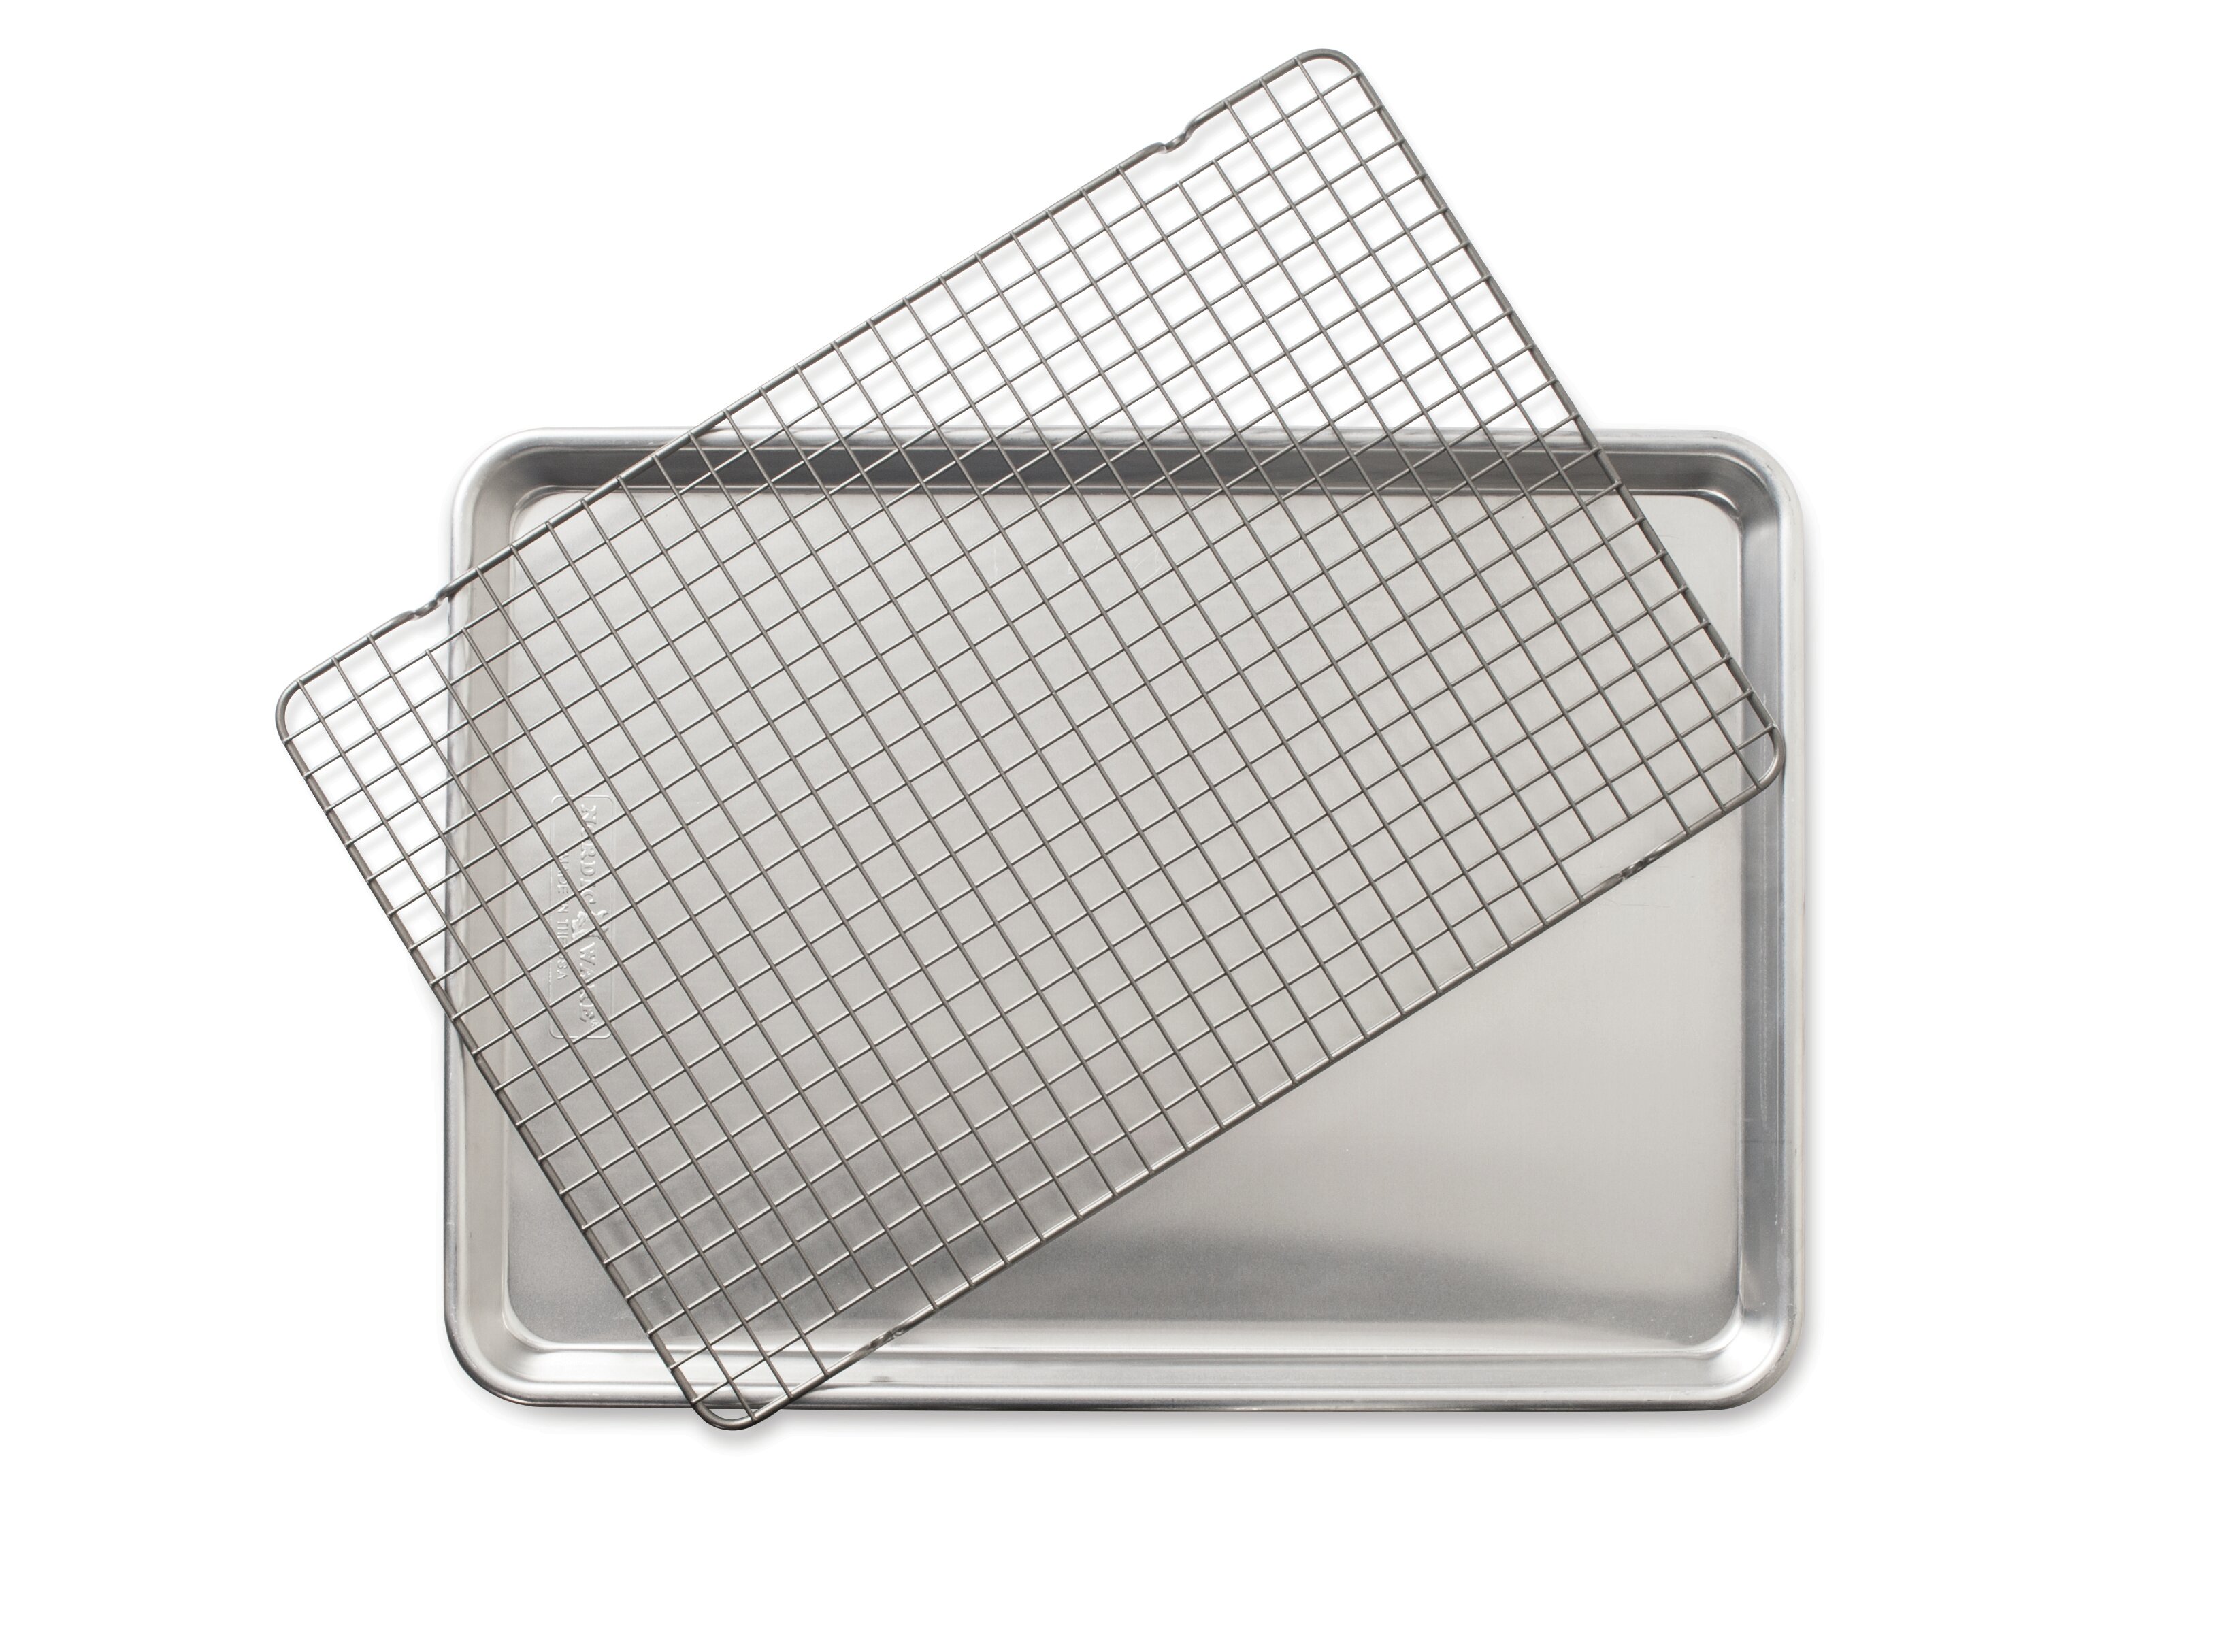 Nordic Ware Naturals 2 Piece Half Sheet with Grid & Reviews